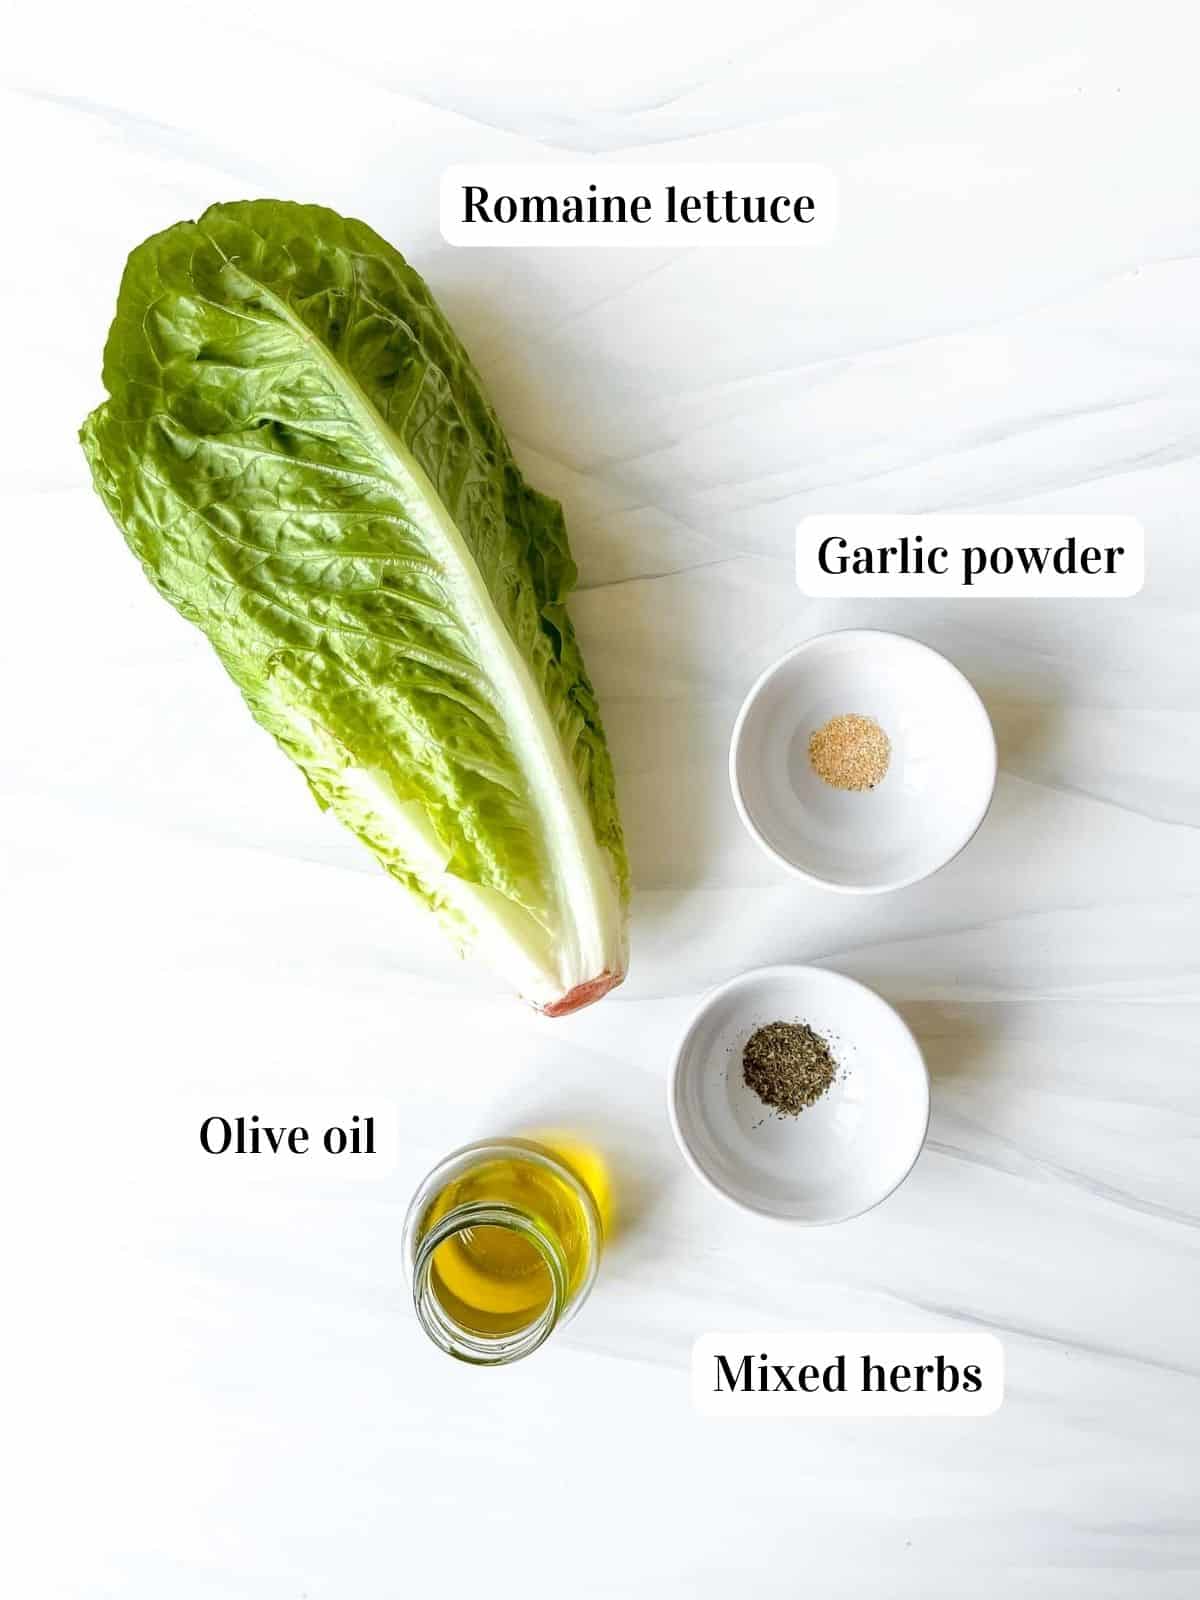 individually labelled ingredients to make air fryer romaine lettuce, bowls of garlic powder and mixed herbs.